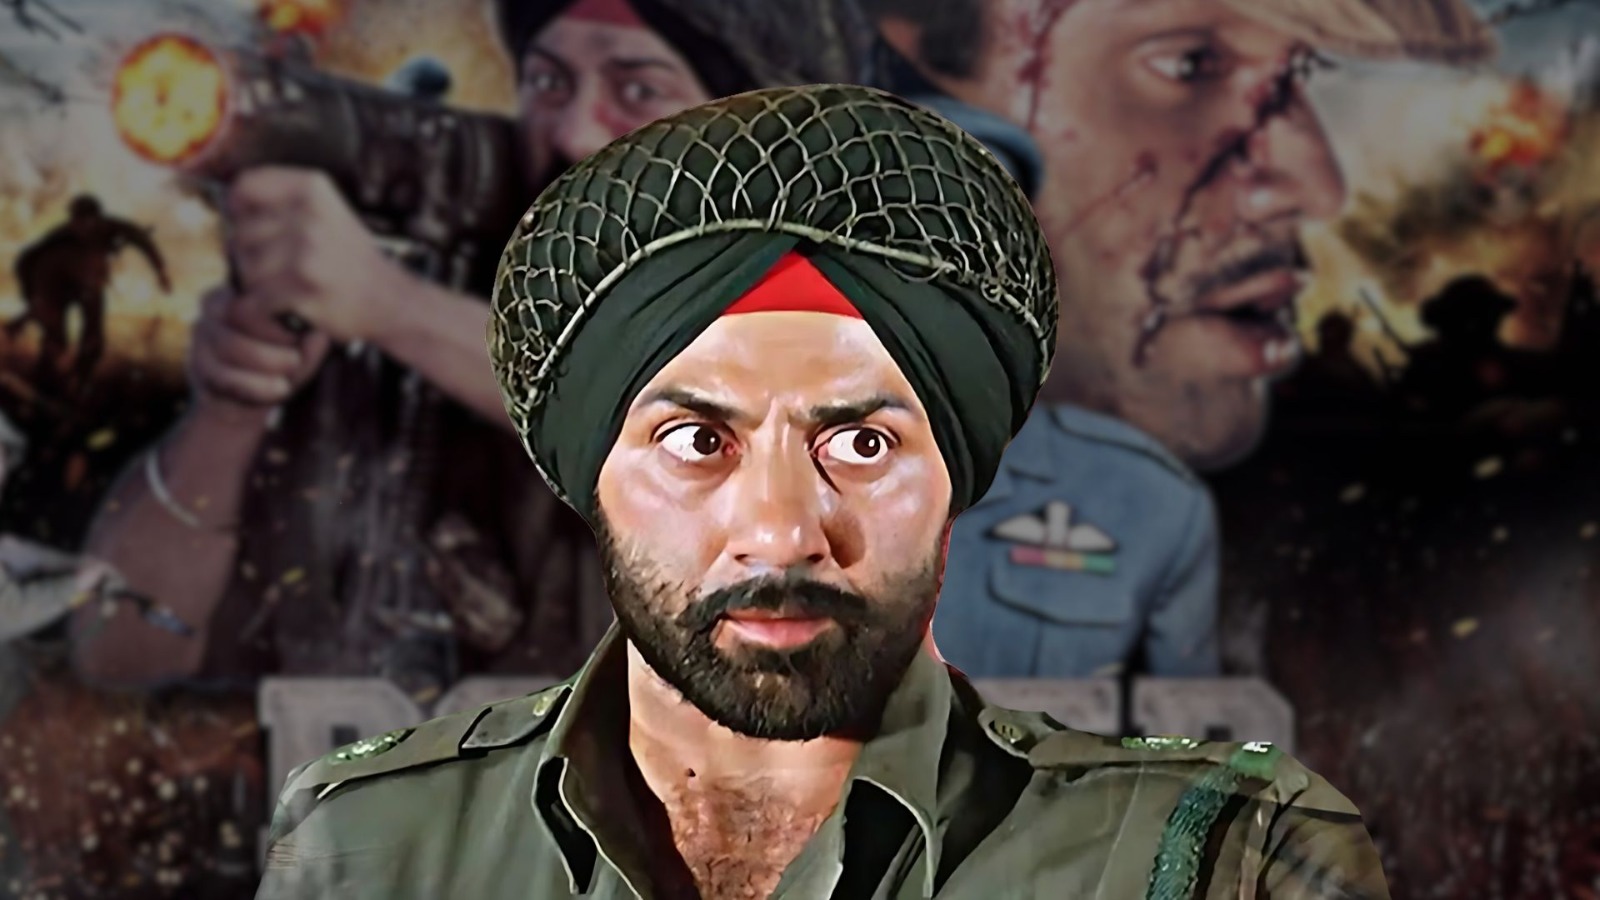 Sunny Deol Announces ‘Border 2’, to Return as Fauji after 27 years